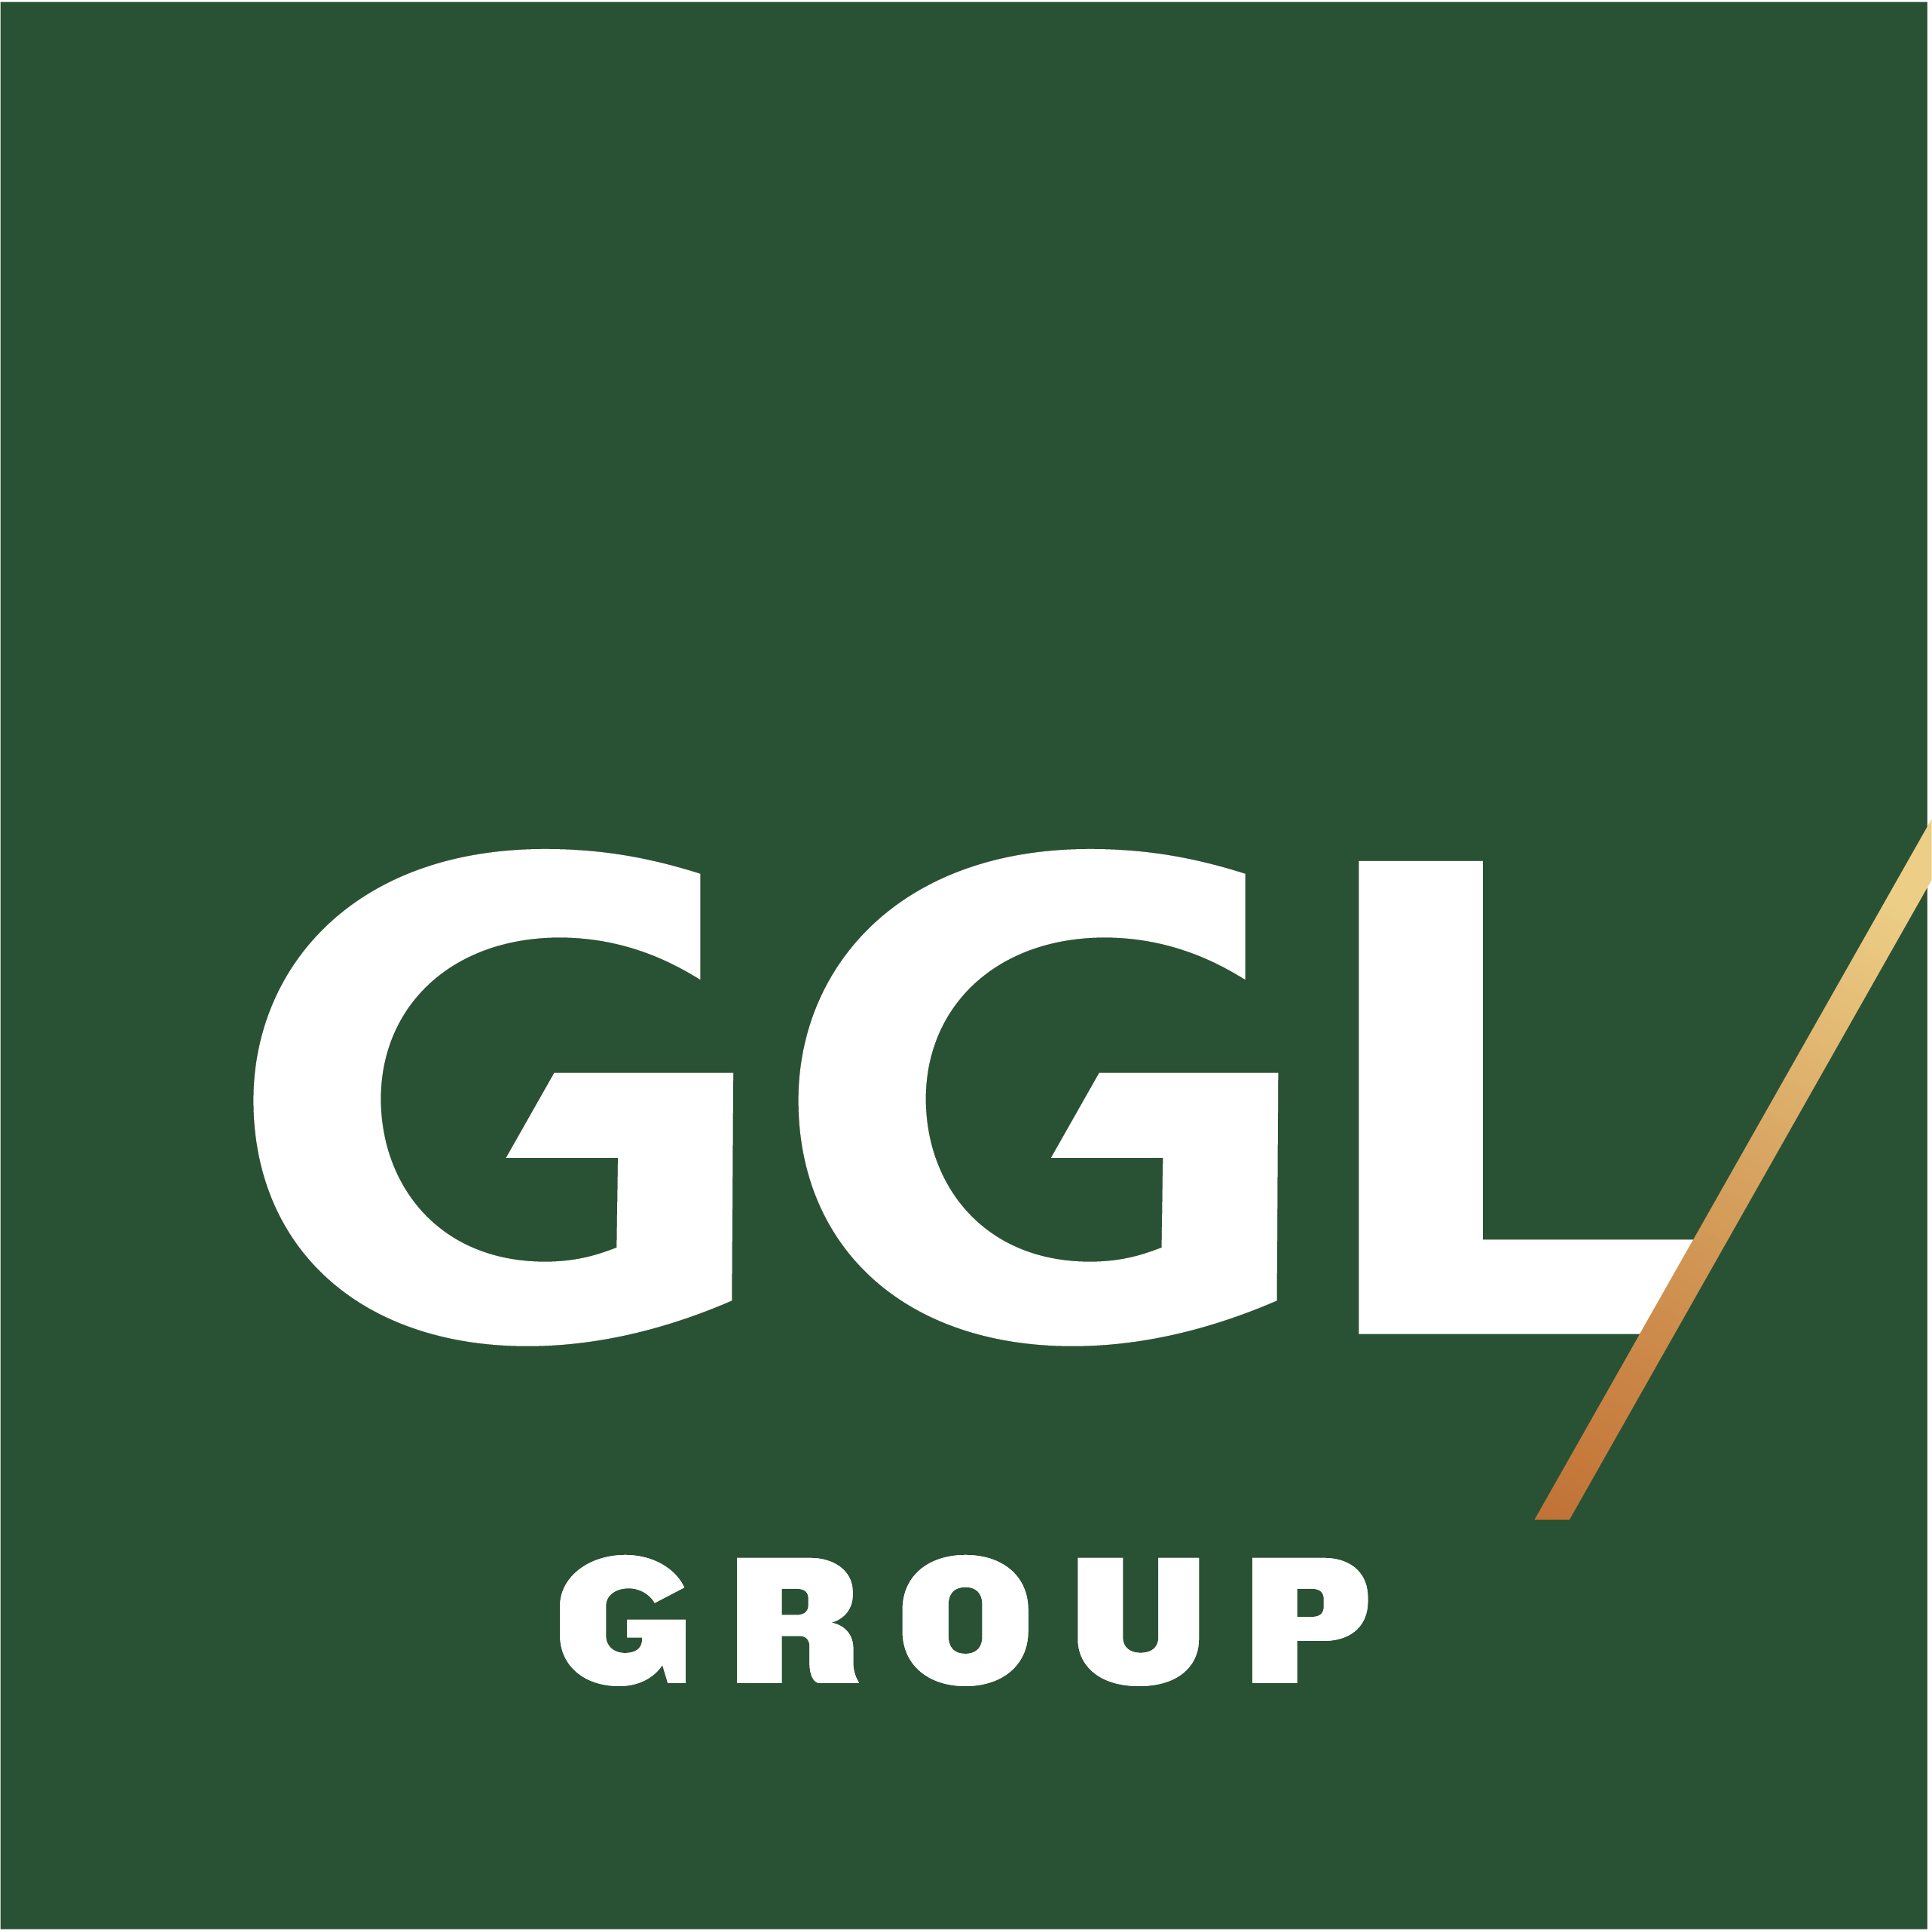 The GGL Group